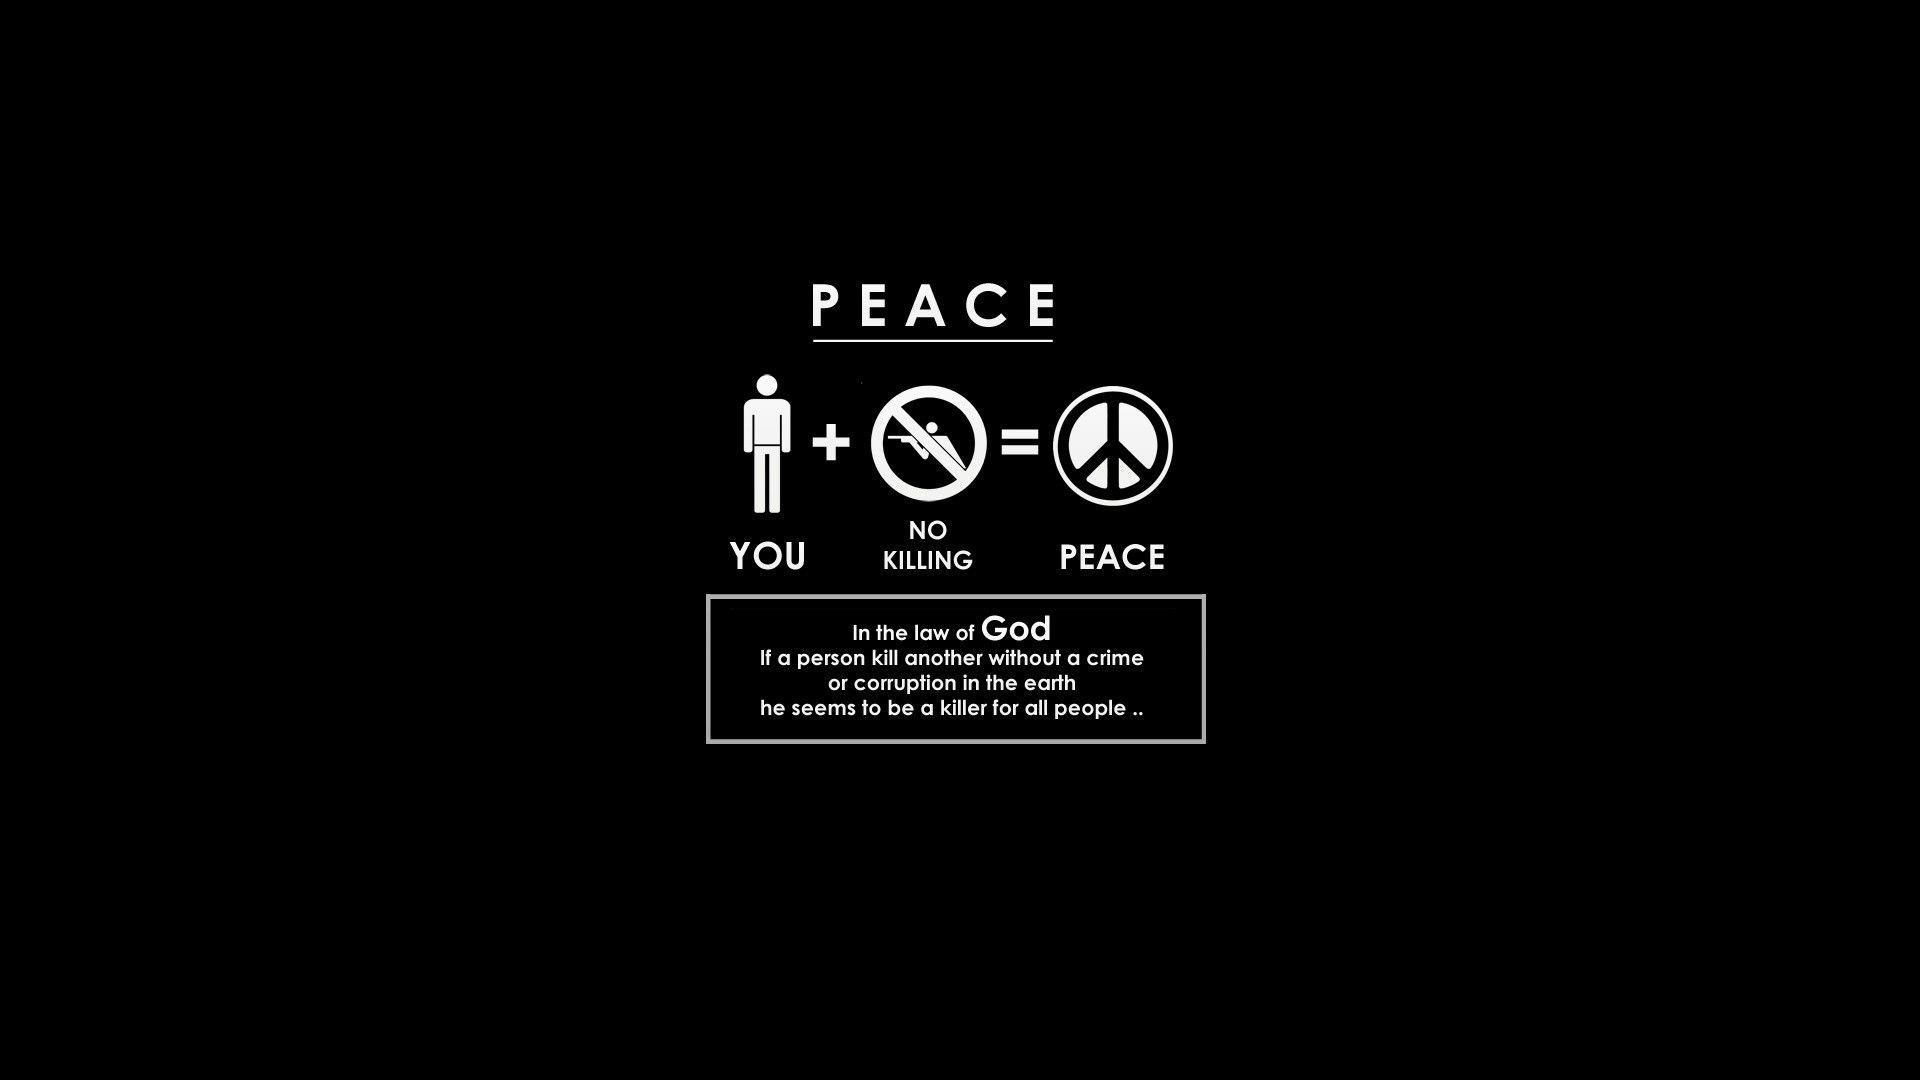 Peace Wallpaper, Peace HDQ Cover Image, Free Download Pack V